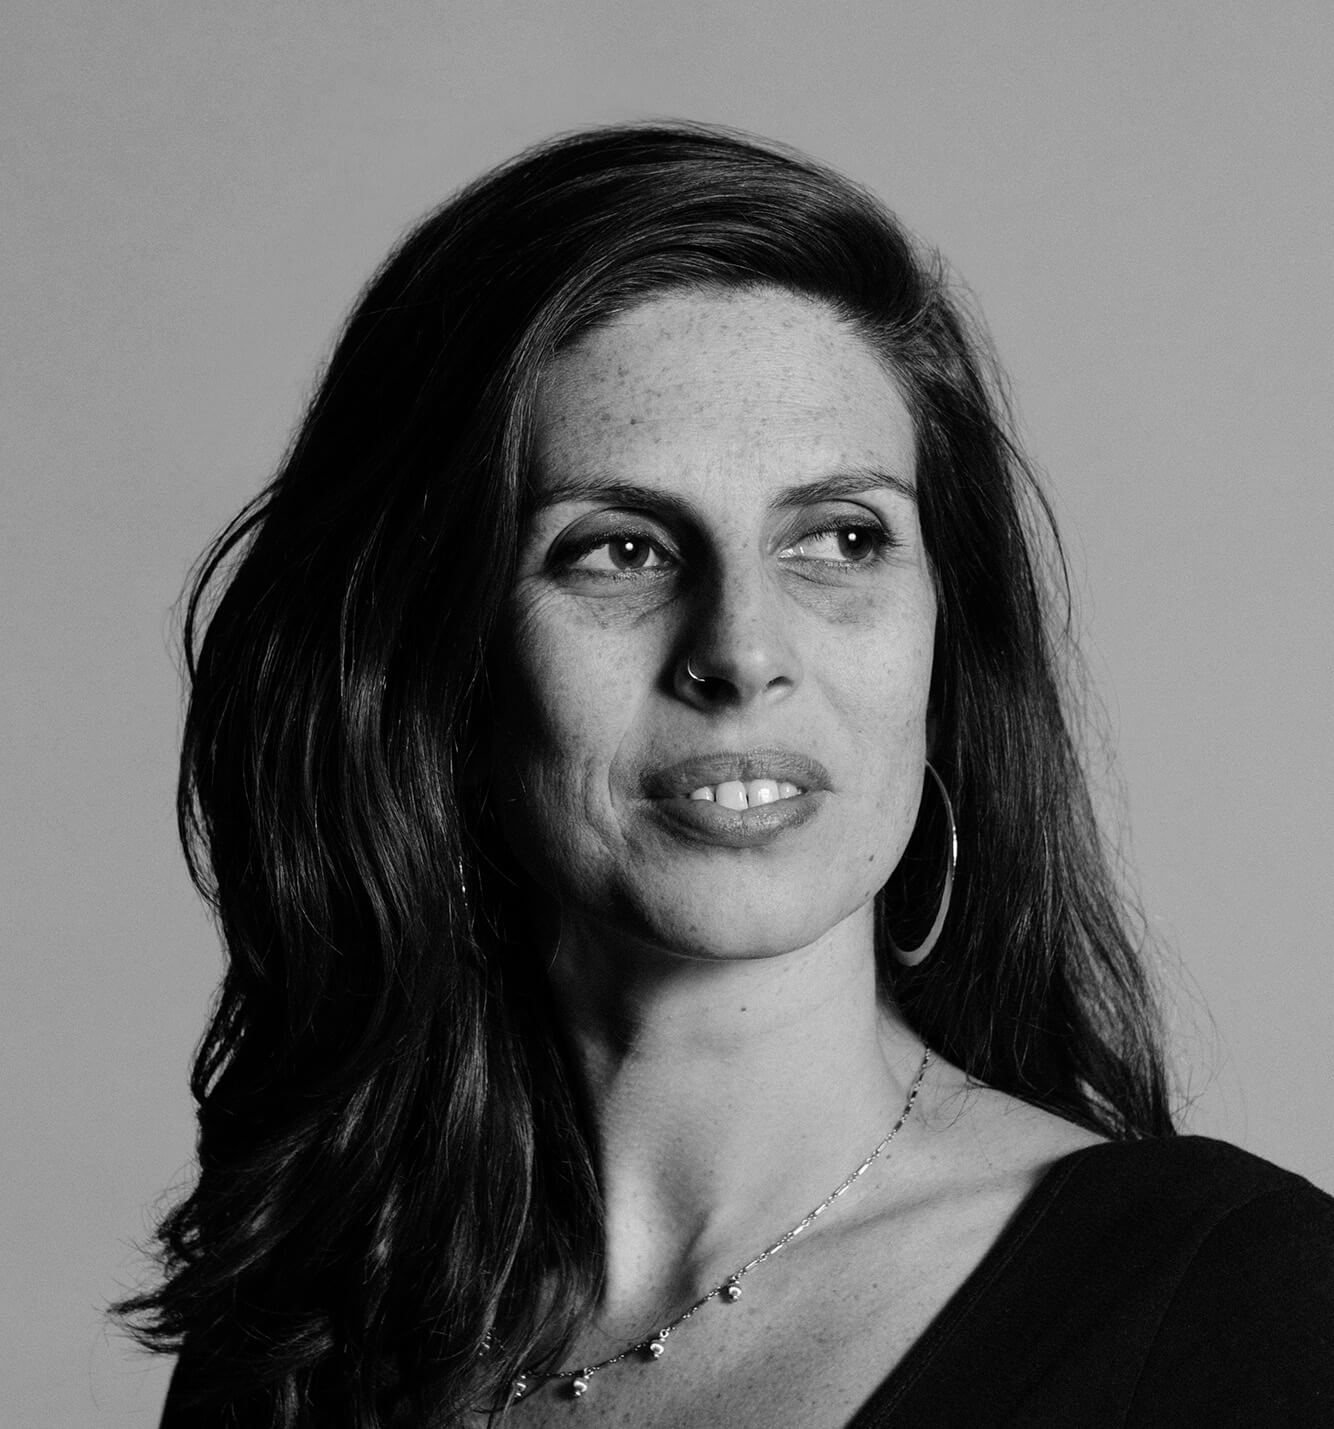 Portrait of Zara Katz, a woman with medium hair, wearing a black shirt with a necklace and looking to the left away from the camera.